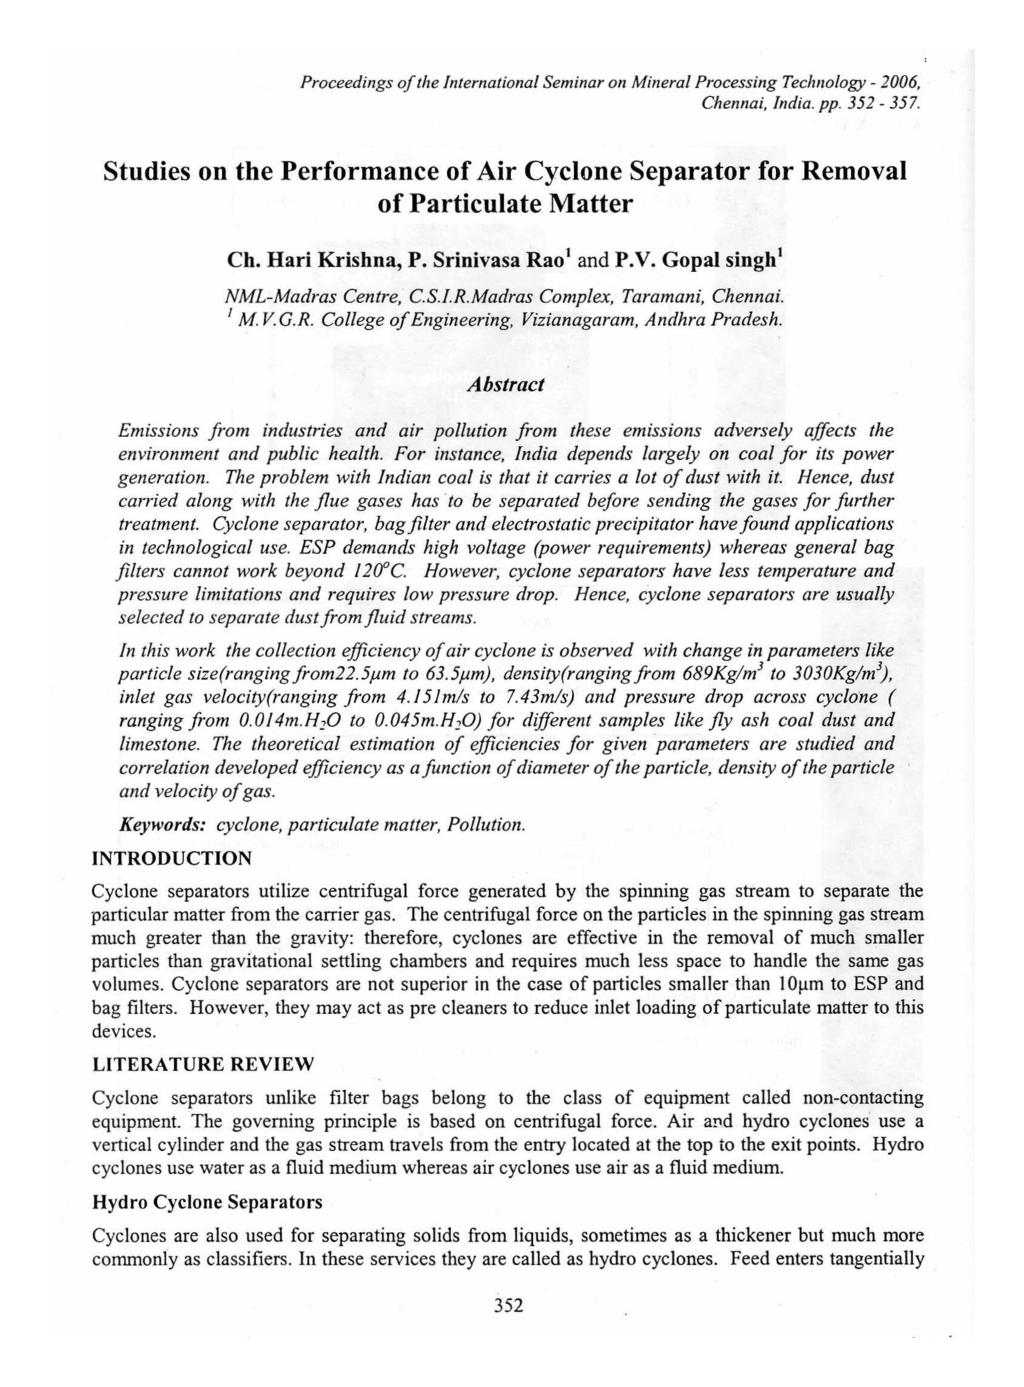 Proceedings of the International Seminar on Mineral Processing Technology - 2006, Chennai, India. pp. 352-357. Studies on the Performance of Air Cyclone Separator for Removal of Particulate Matter Ch.